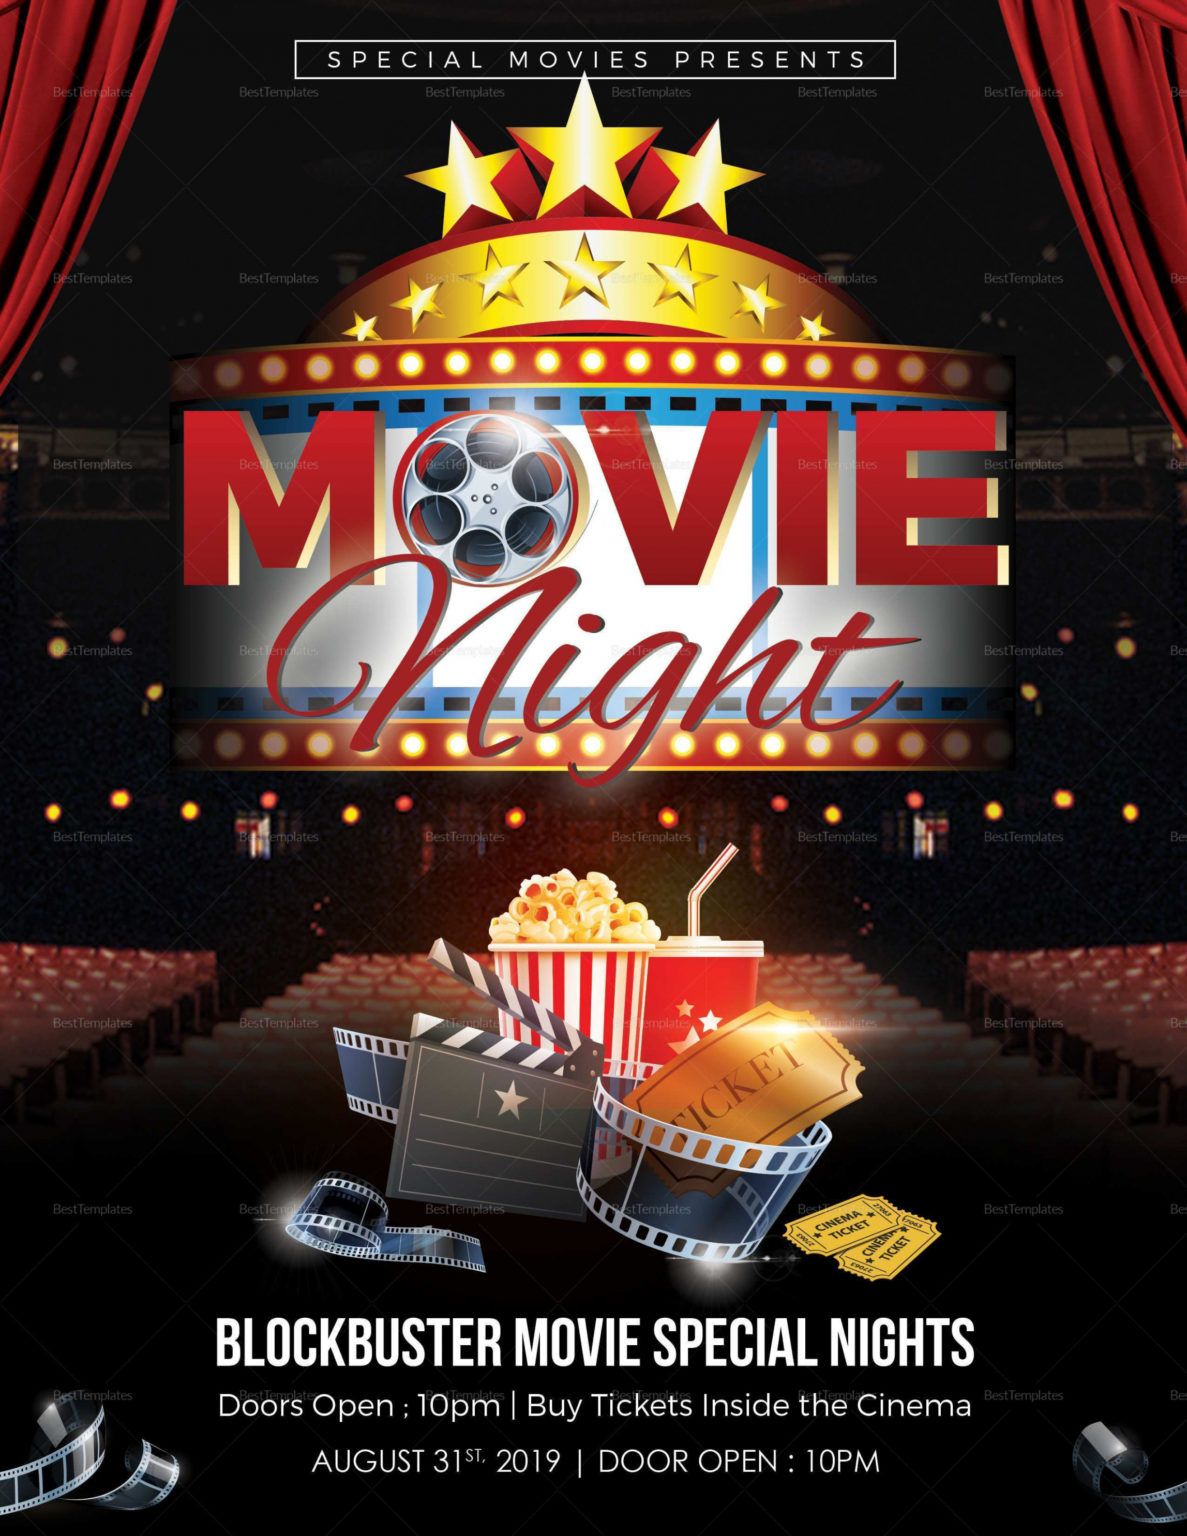 free-32-visiting-family-movie-night-flyer-template-photo-by-church